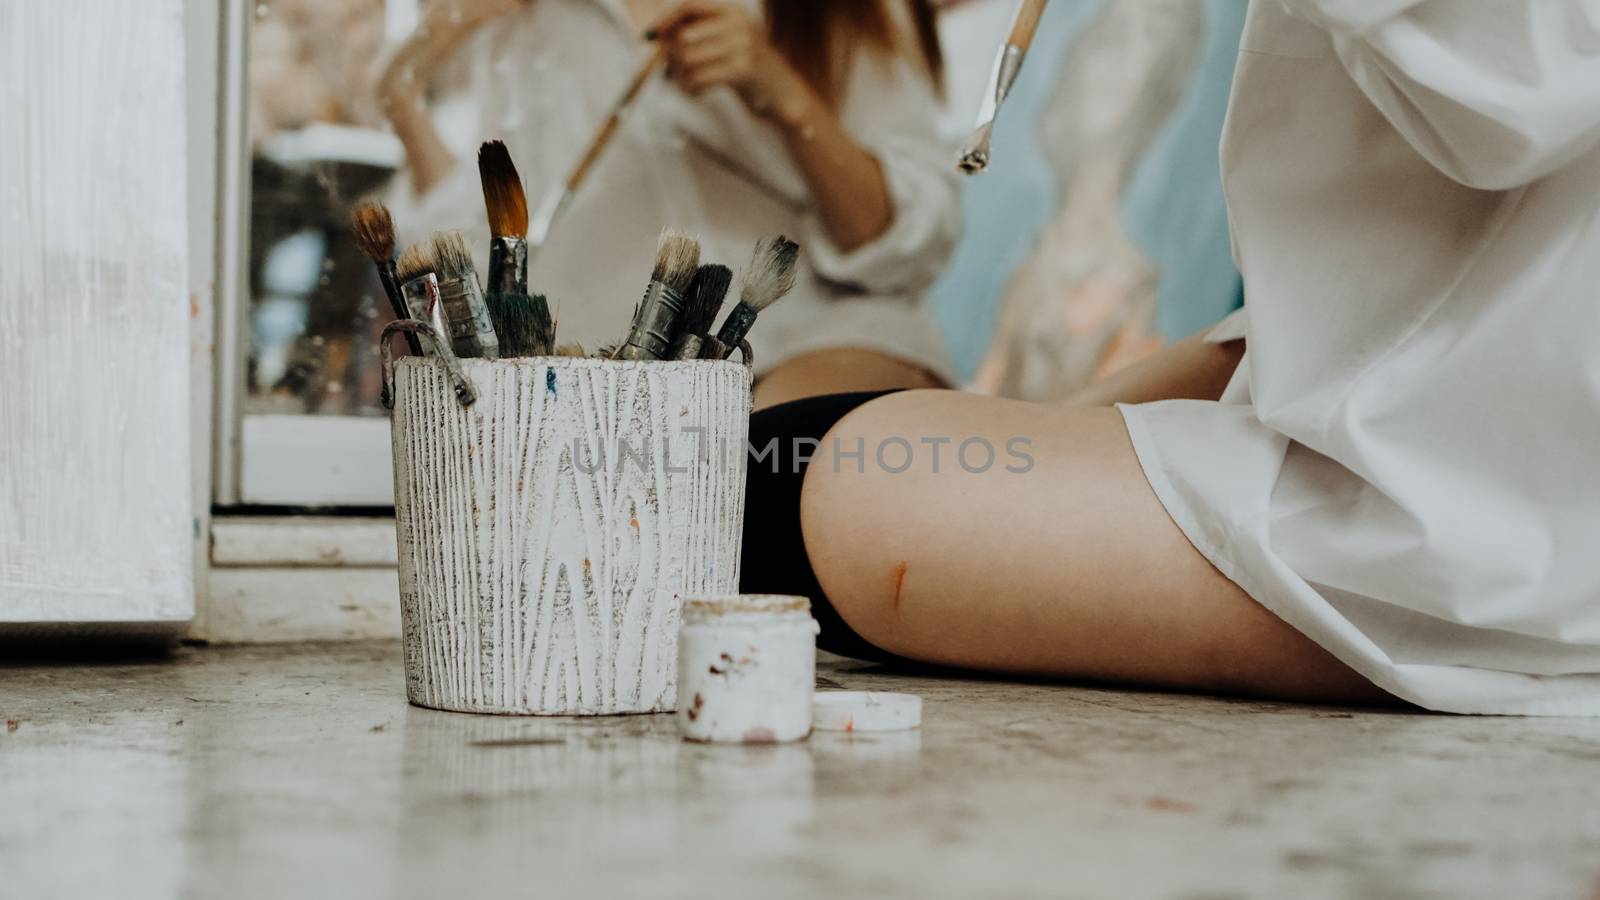 Woman painter sitting on the floor in front of mirror and drawing. Art studio interior. Drawing supplies, oil paints, artist brushes